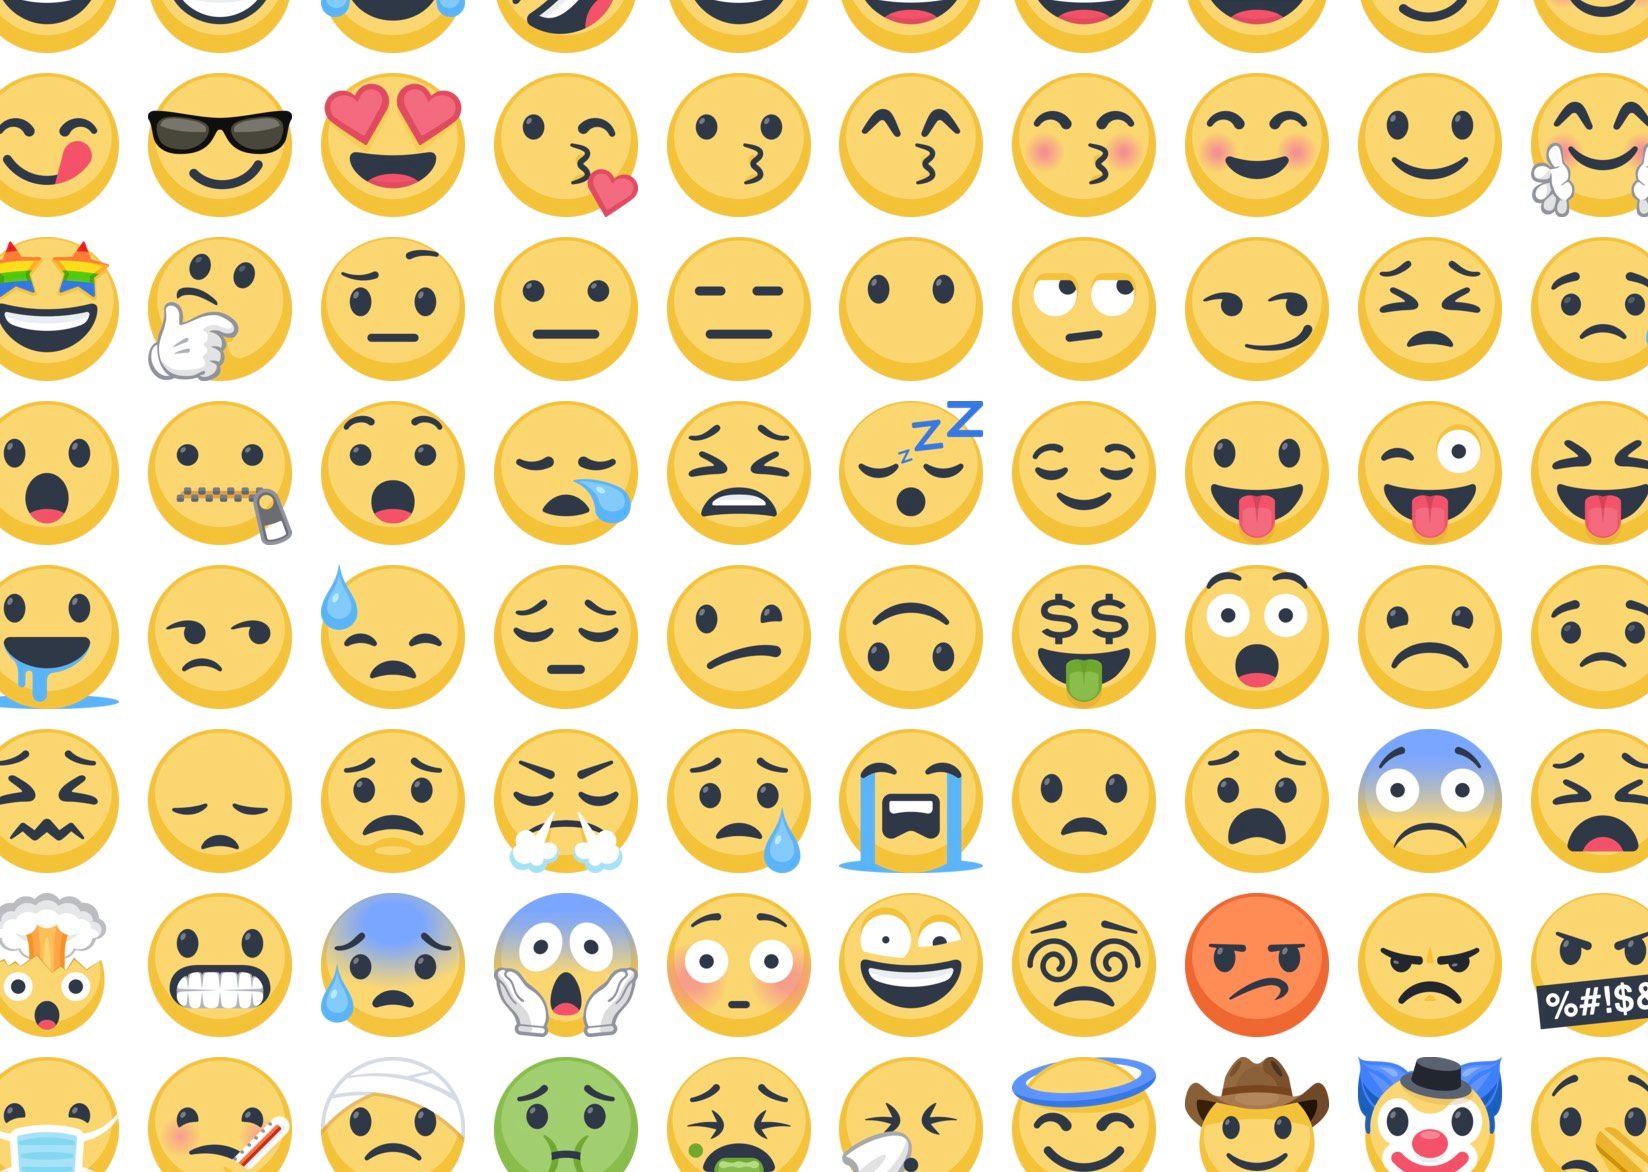 Facebook Reveals Most and Least Used Emojis